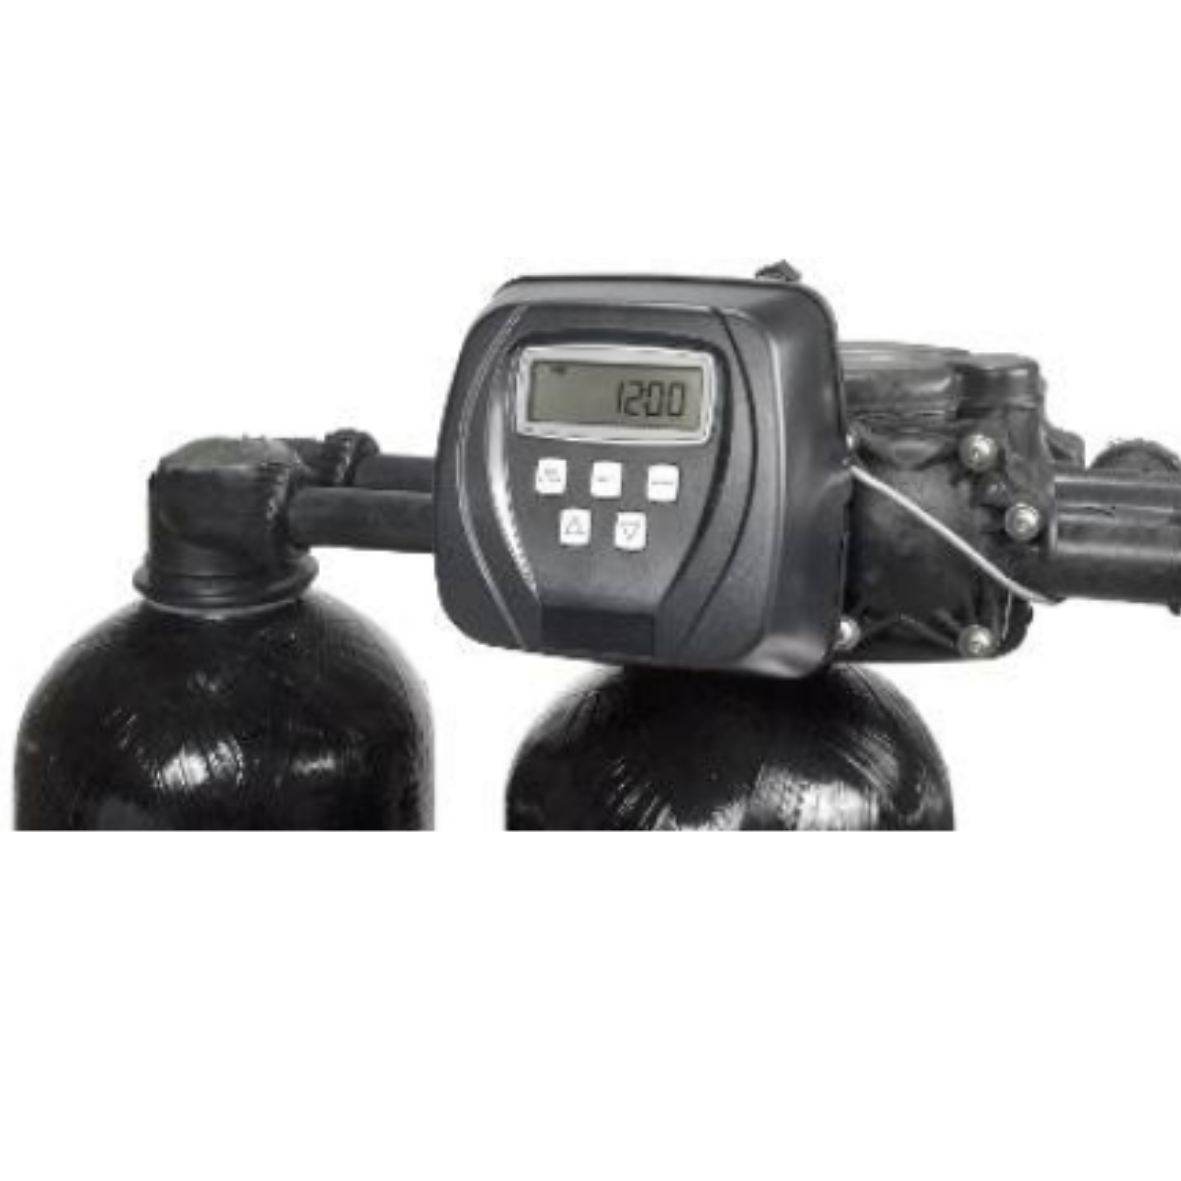 Duplex Clack WS1TT Meter Controlled Commercial Water Softener 8" x 17", 10 Litres